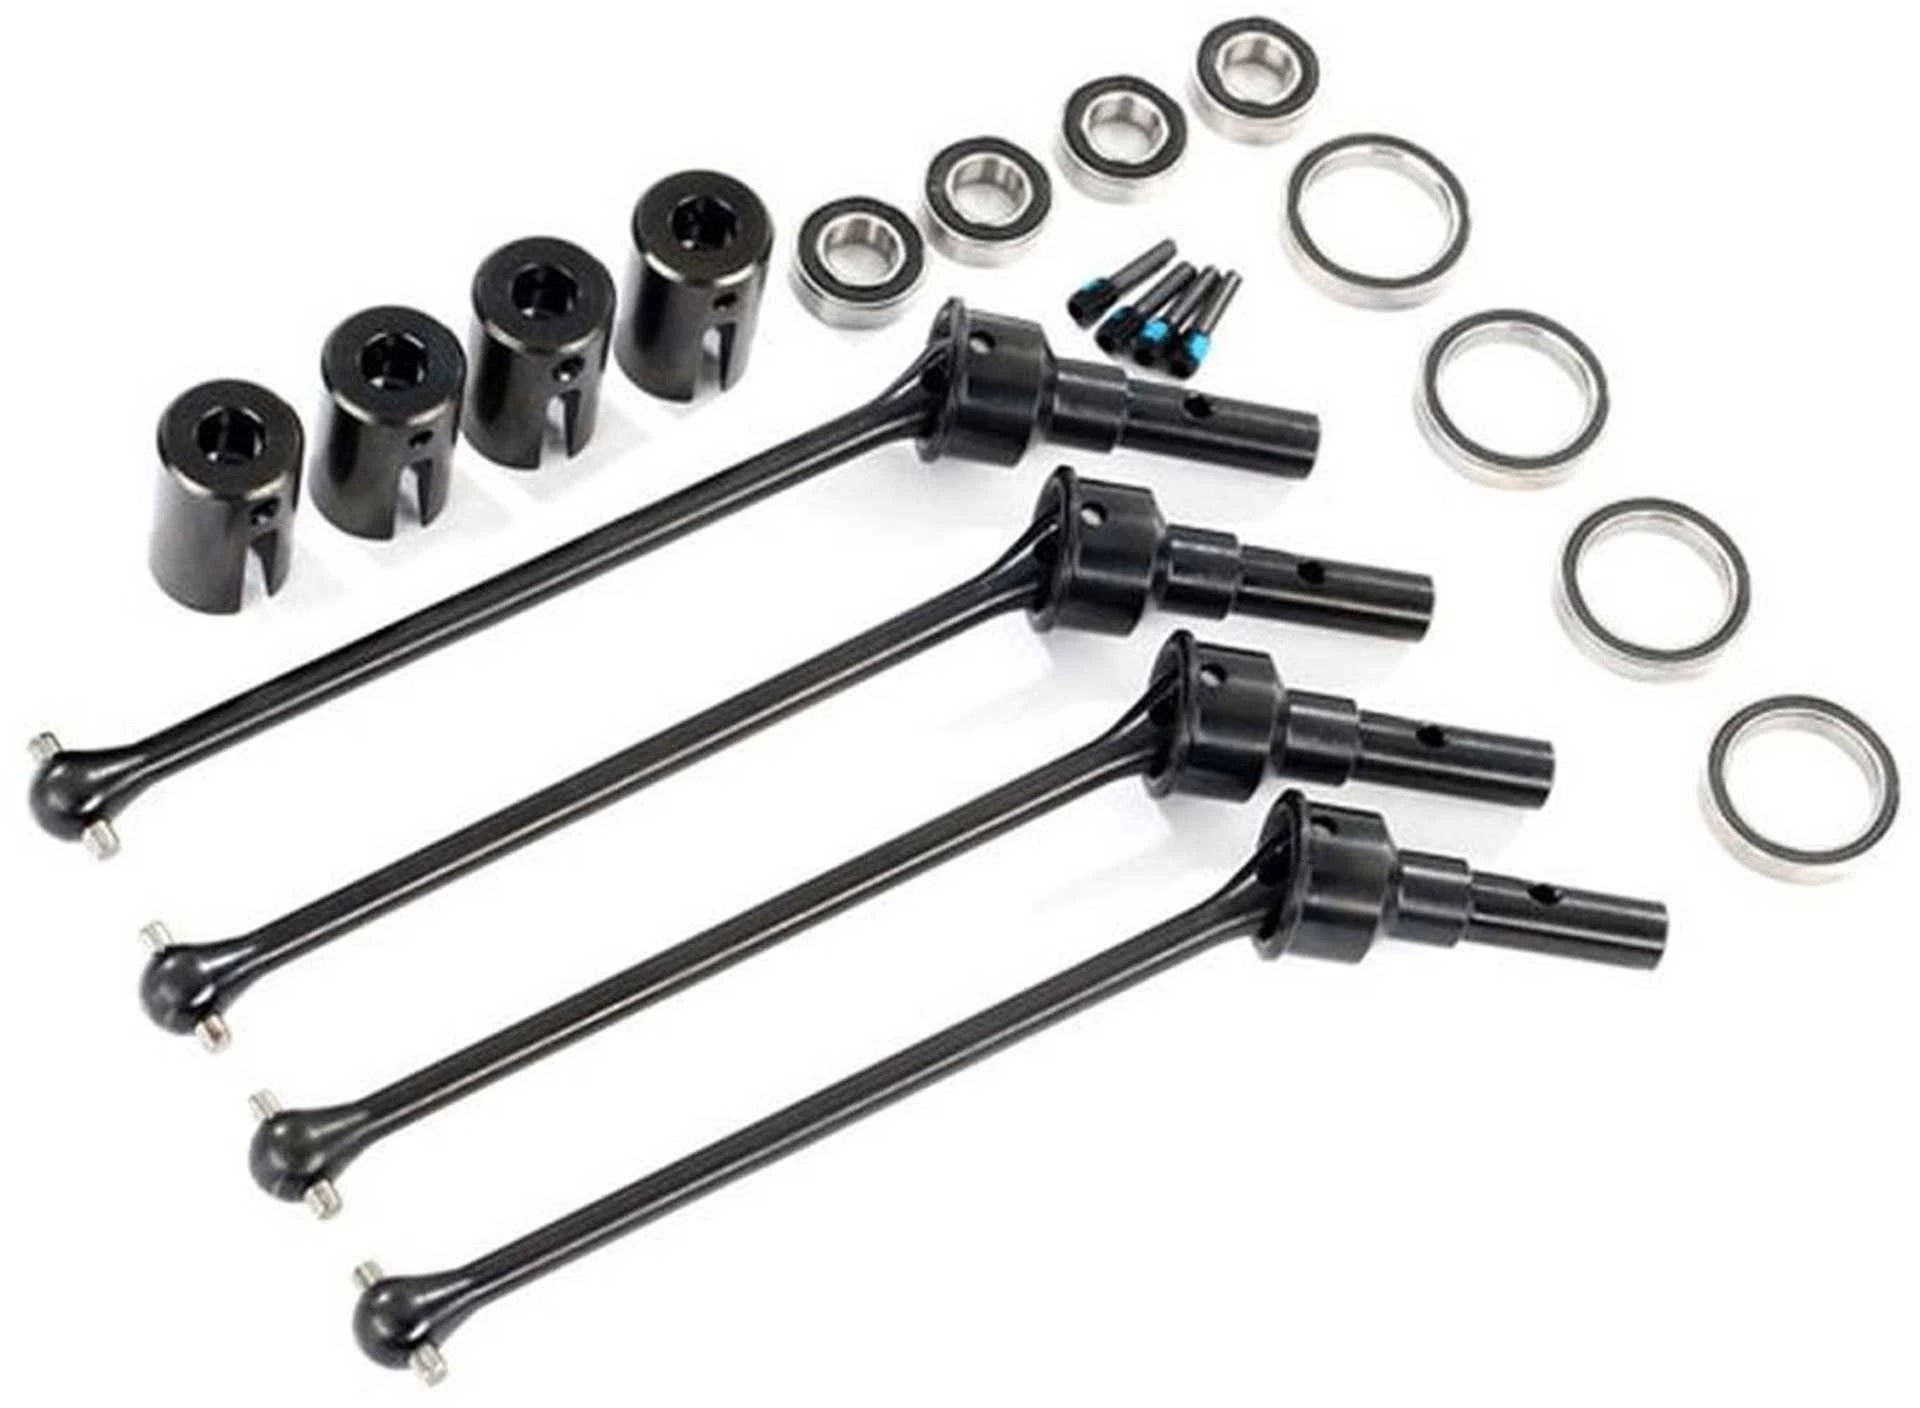 Traxxas-Traxxas  Driveshafts, Steel Constant Velocity Front Or Rear (4) For Use With Wide Maxx Suspension Kit-rc-cars-scale-models-sunshine-coast